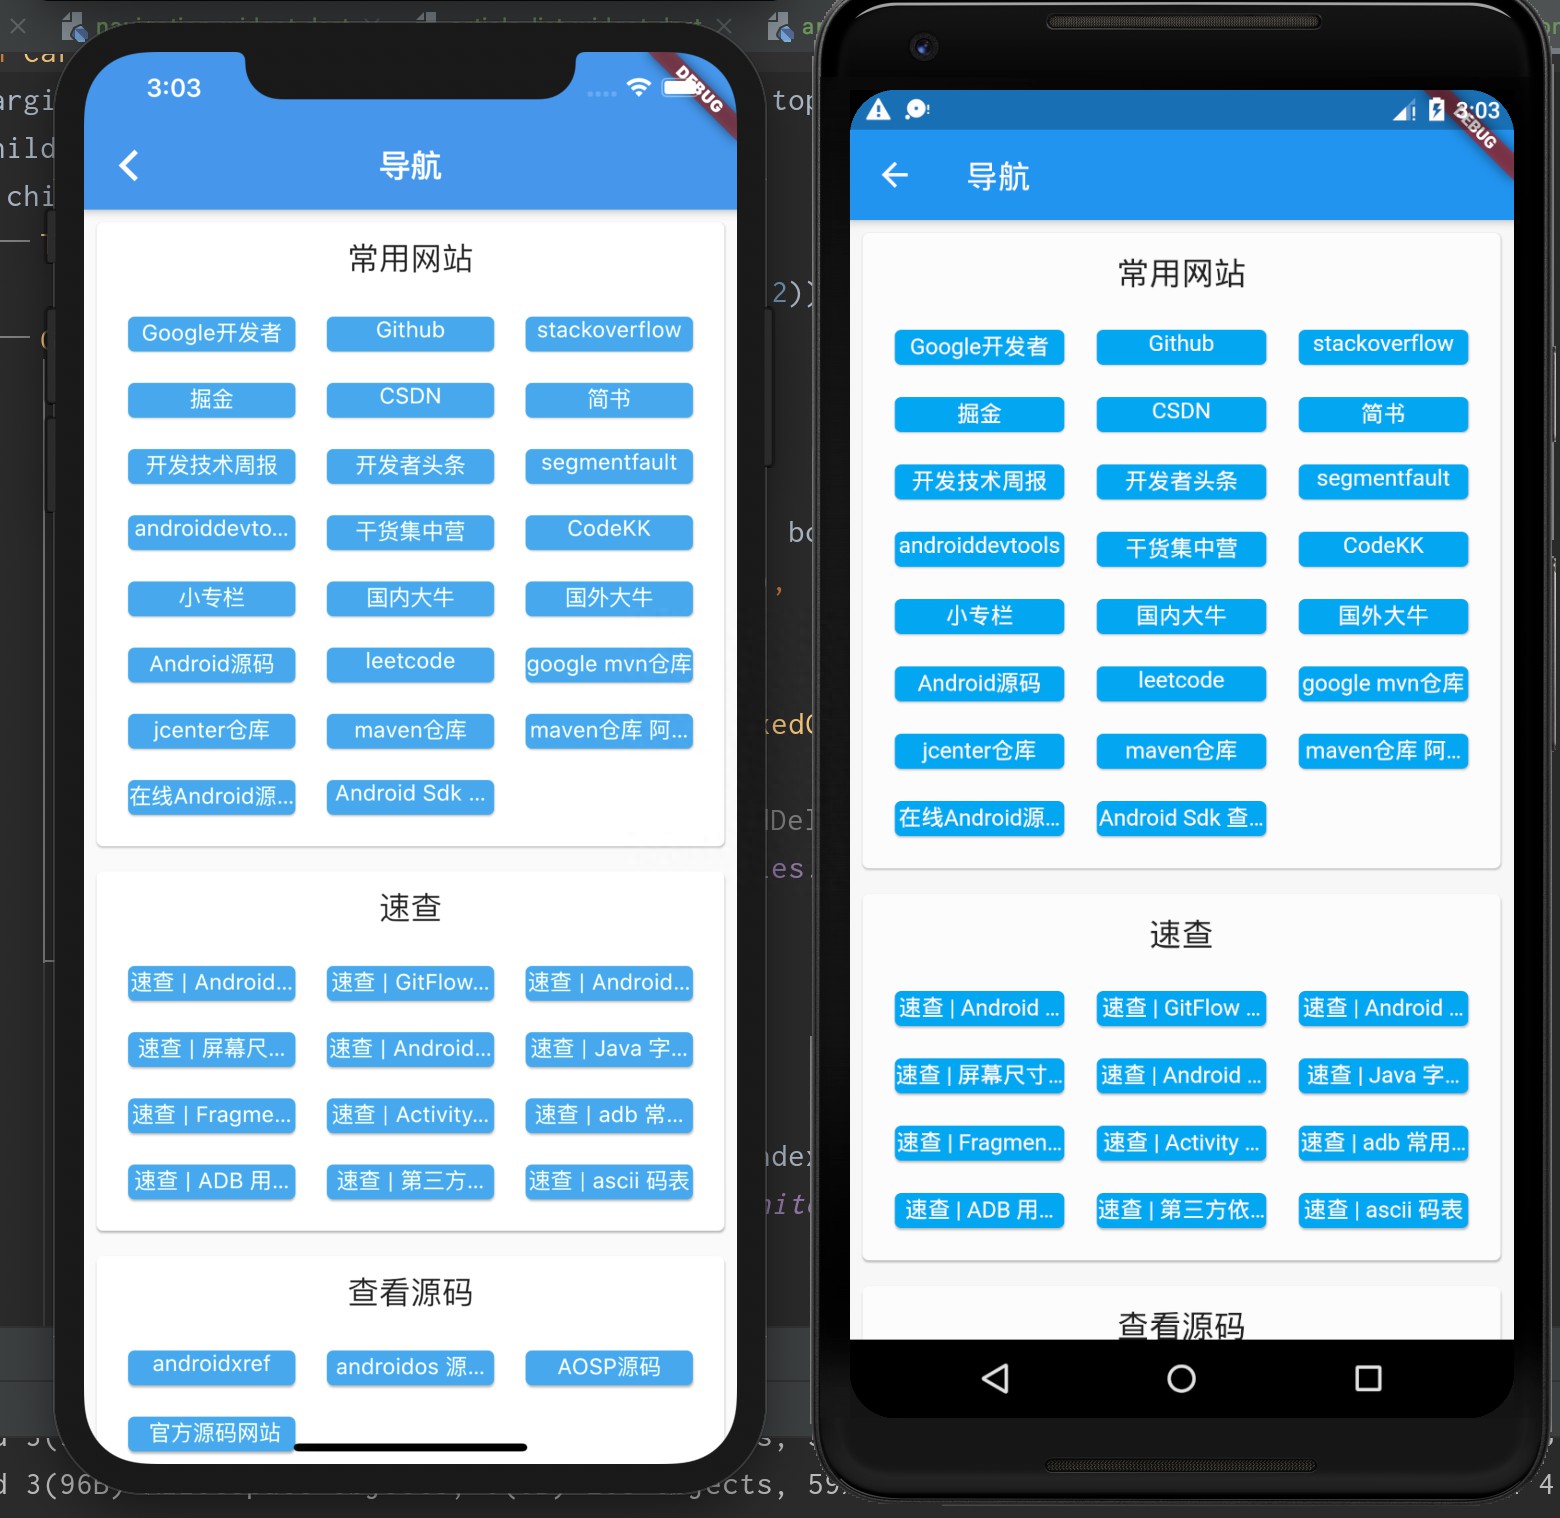 android gridview（gridview的介绍）